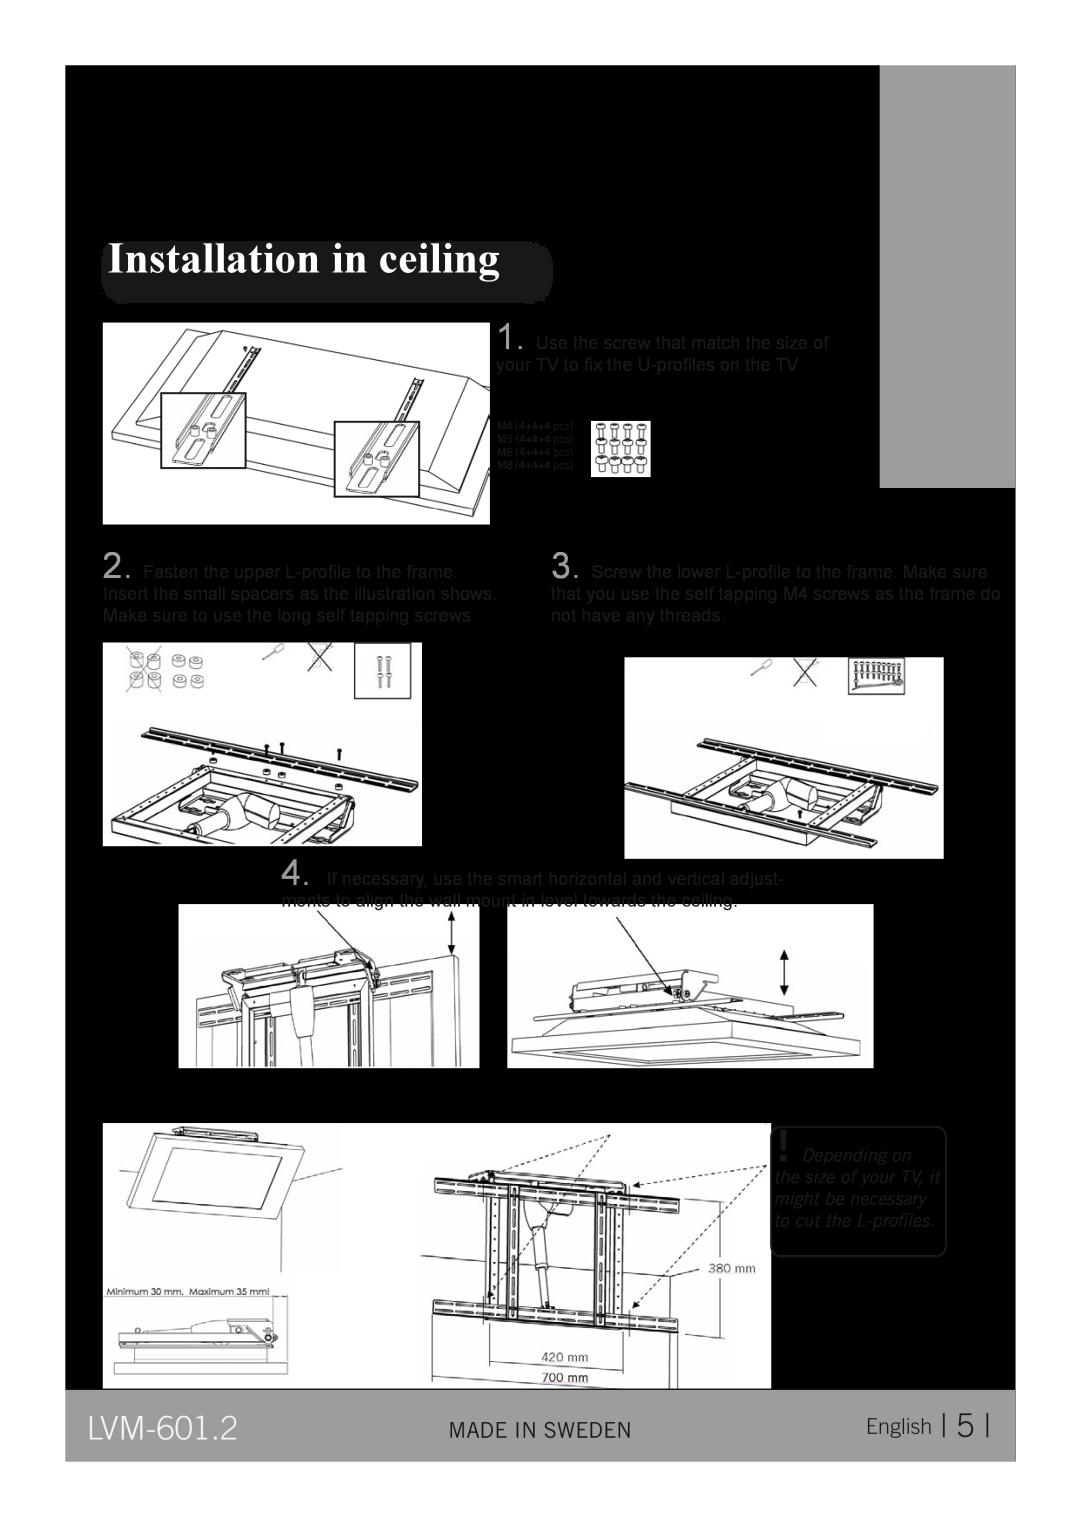 CLO Systems LVM-601-2 manual Installation in ceiling, LVM-601.2, English 